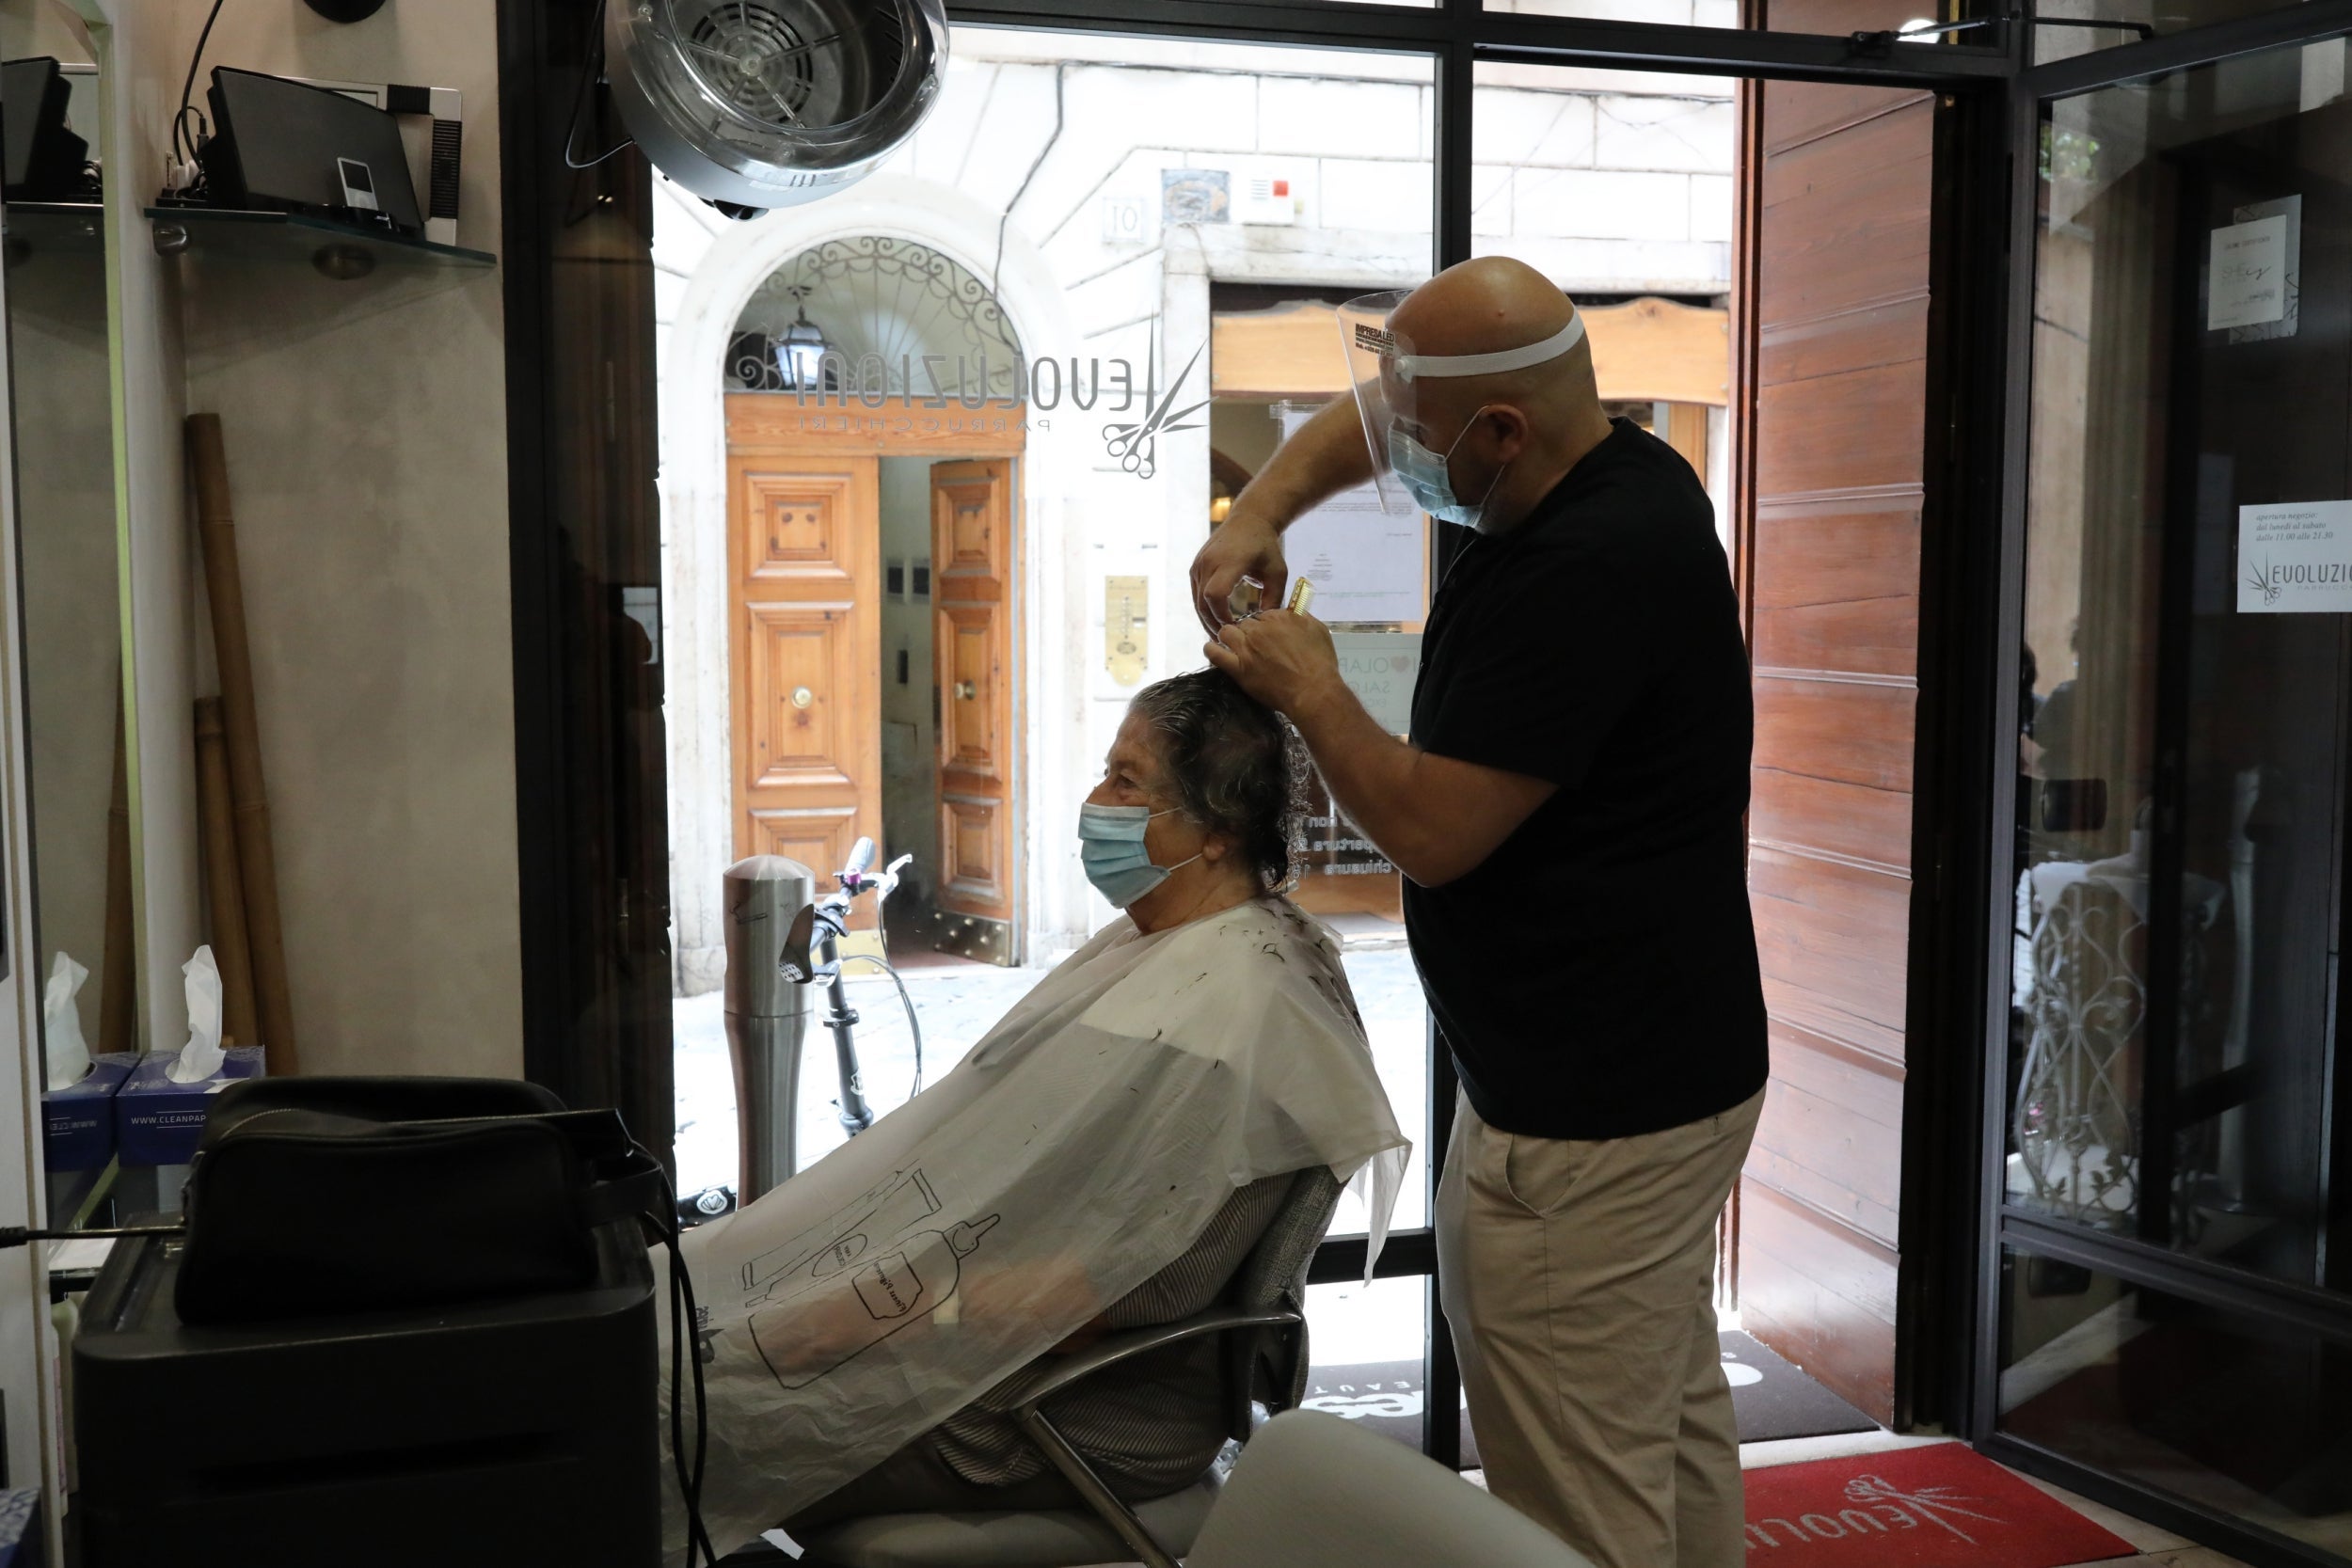 A hairdresser in Rome cuts a woman’s hair using all the protective devices prescribed by regulations